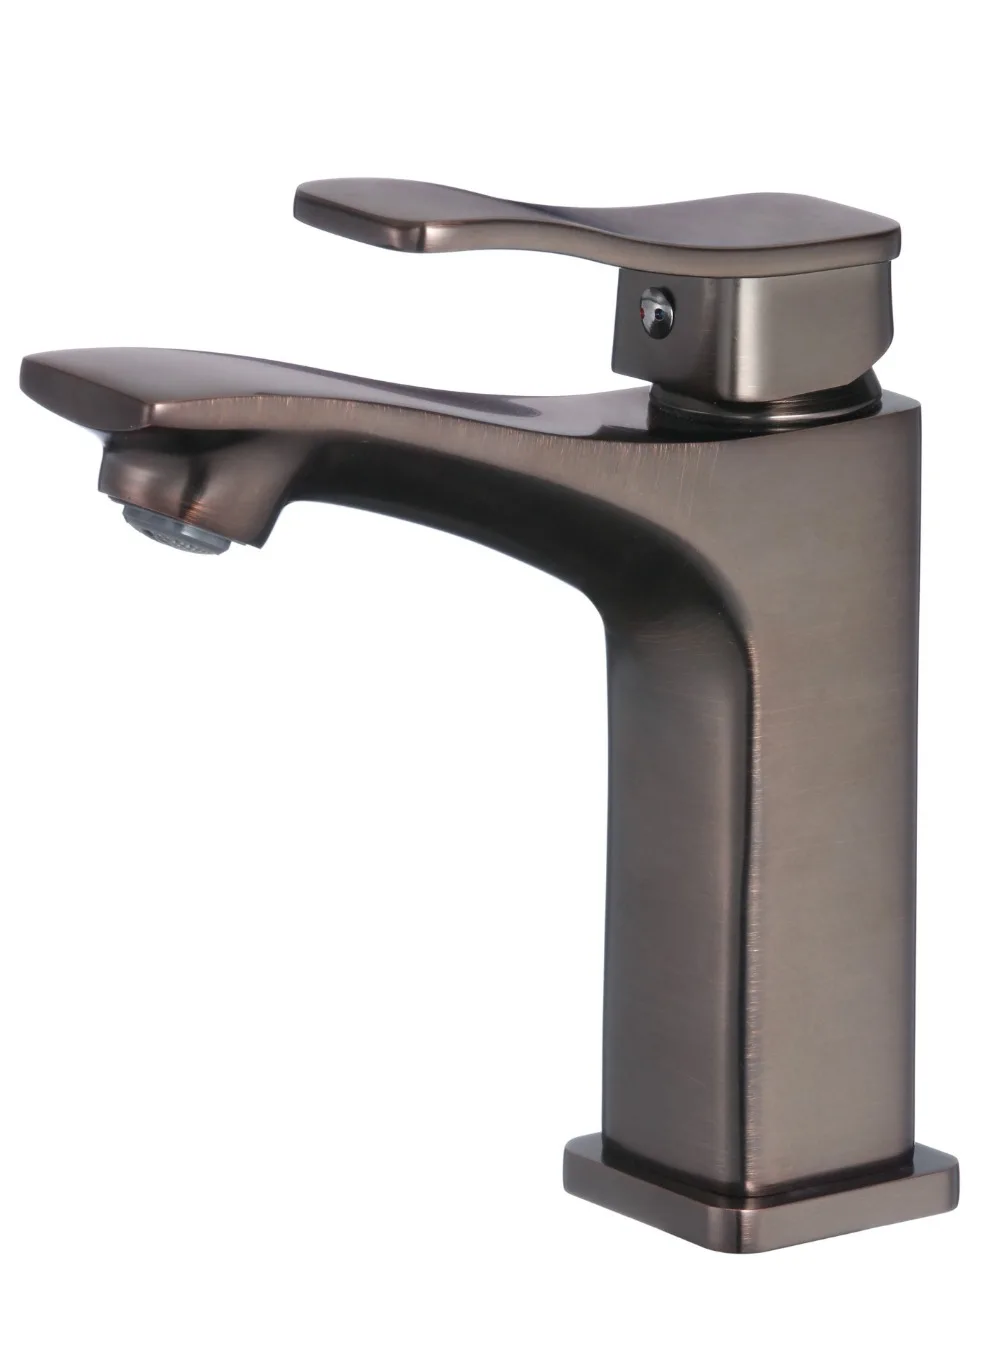 

Western style Waterfall Bathroom Faucet Single Handle Basin Sink Mixer Tap,luxury Lavatory Faucets-Oil Rubbed Bronze